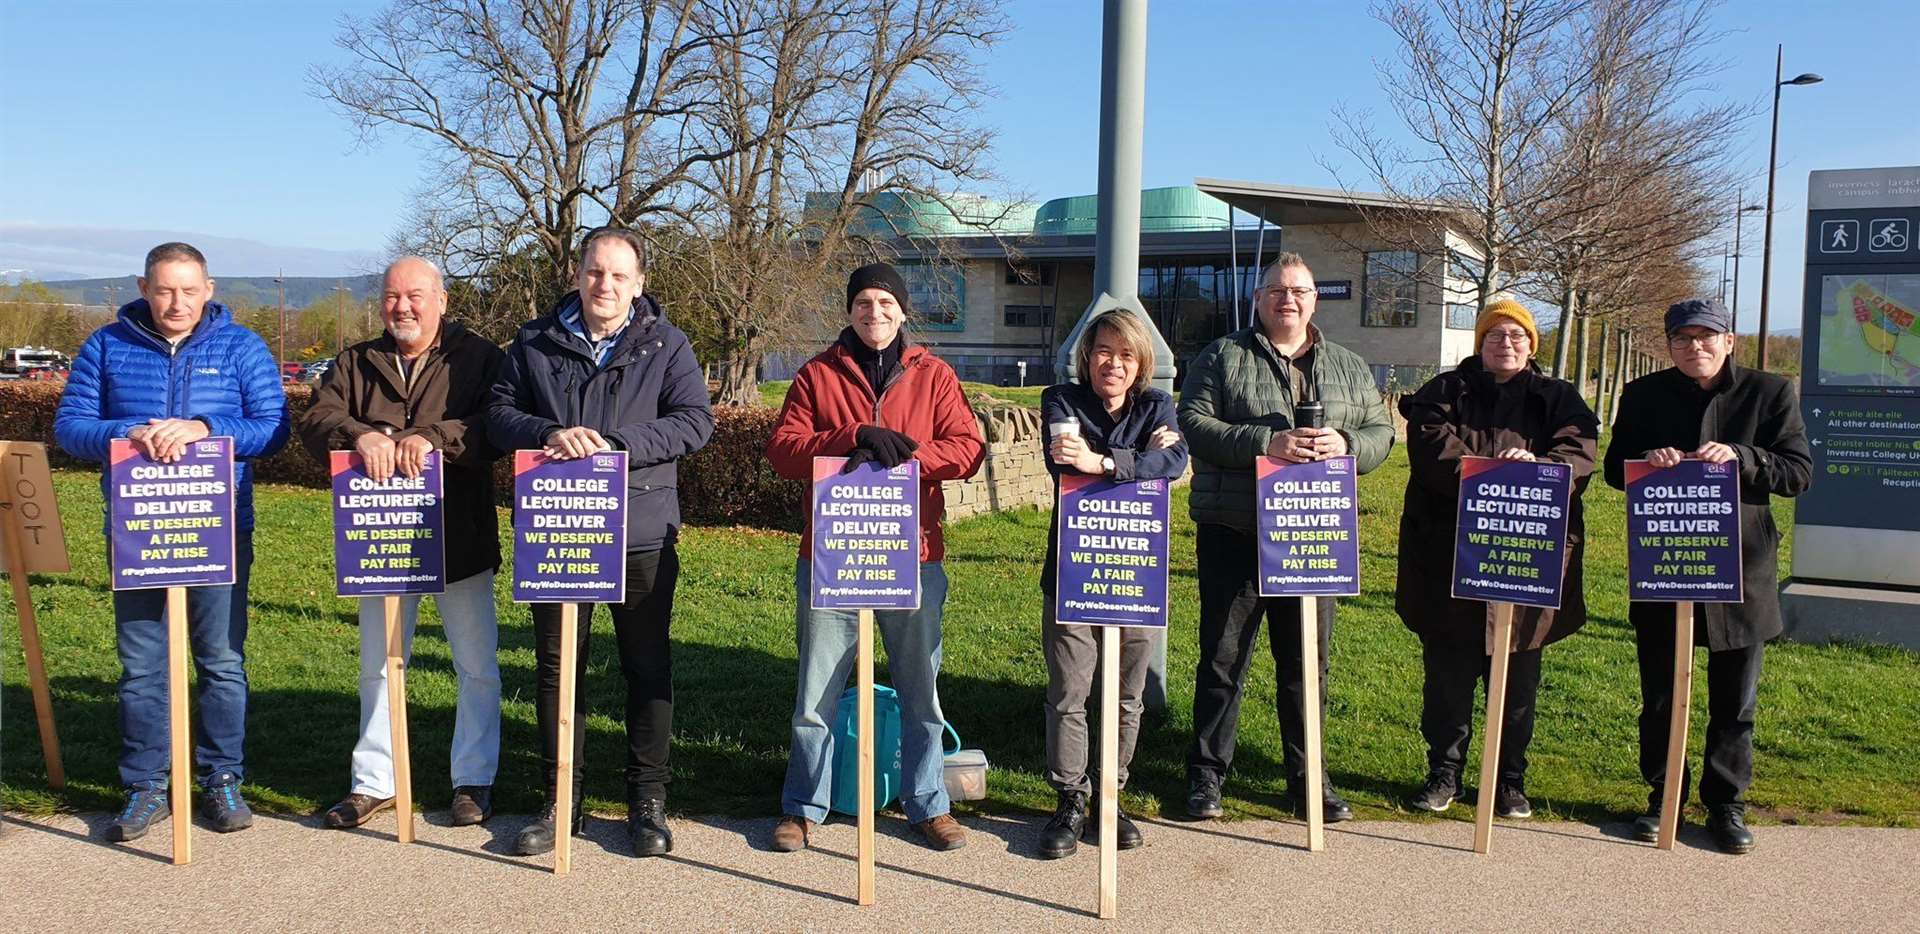 College lecturers at UHI are on strike again.